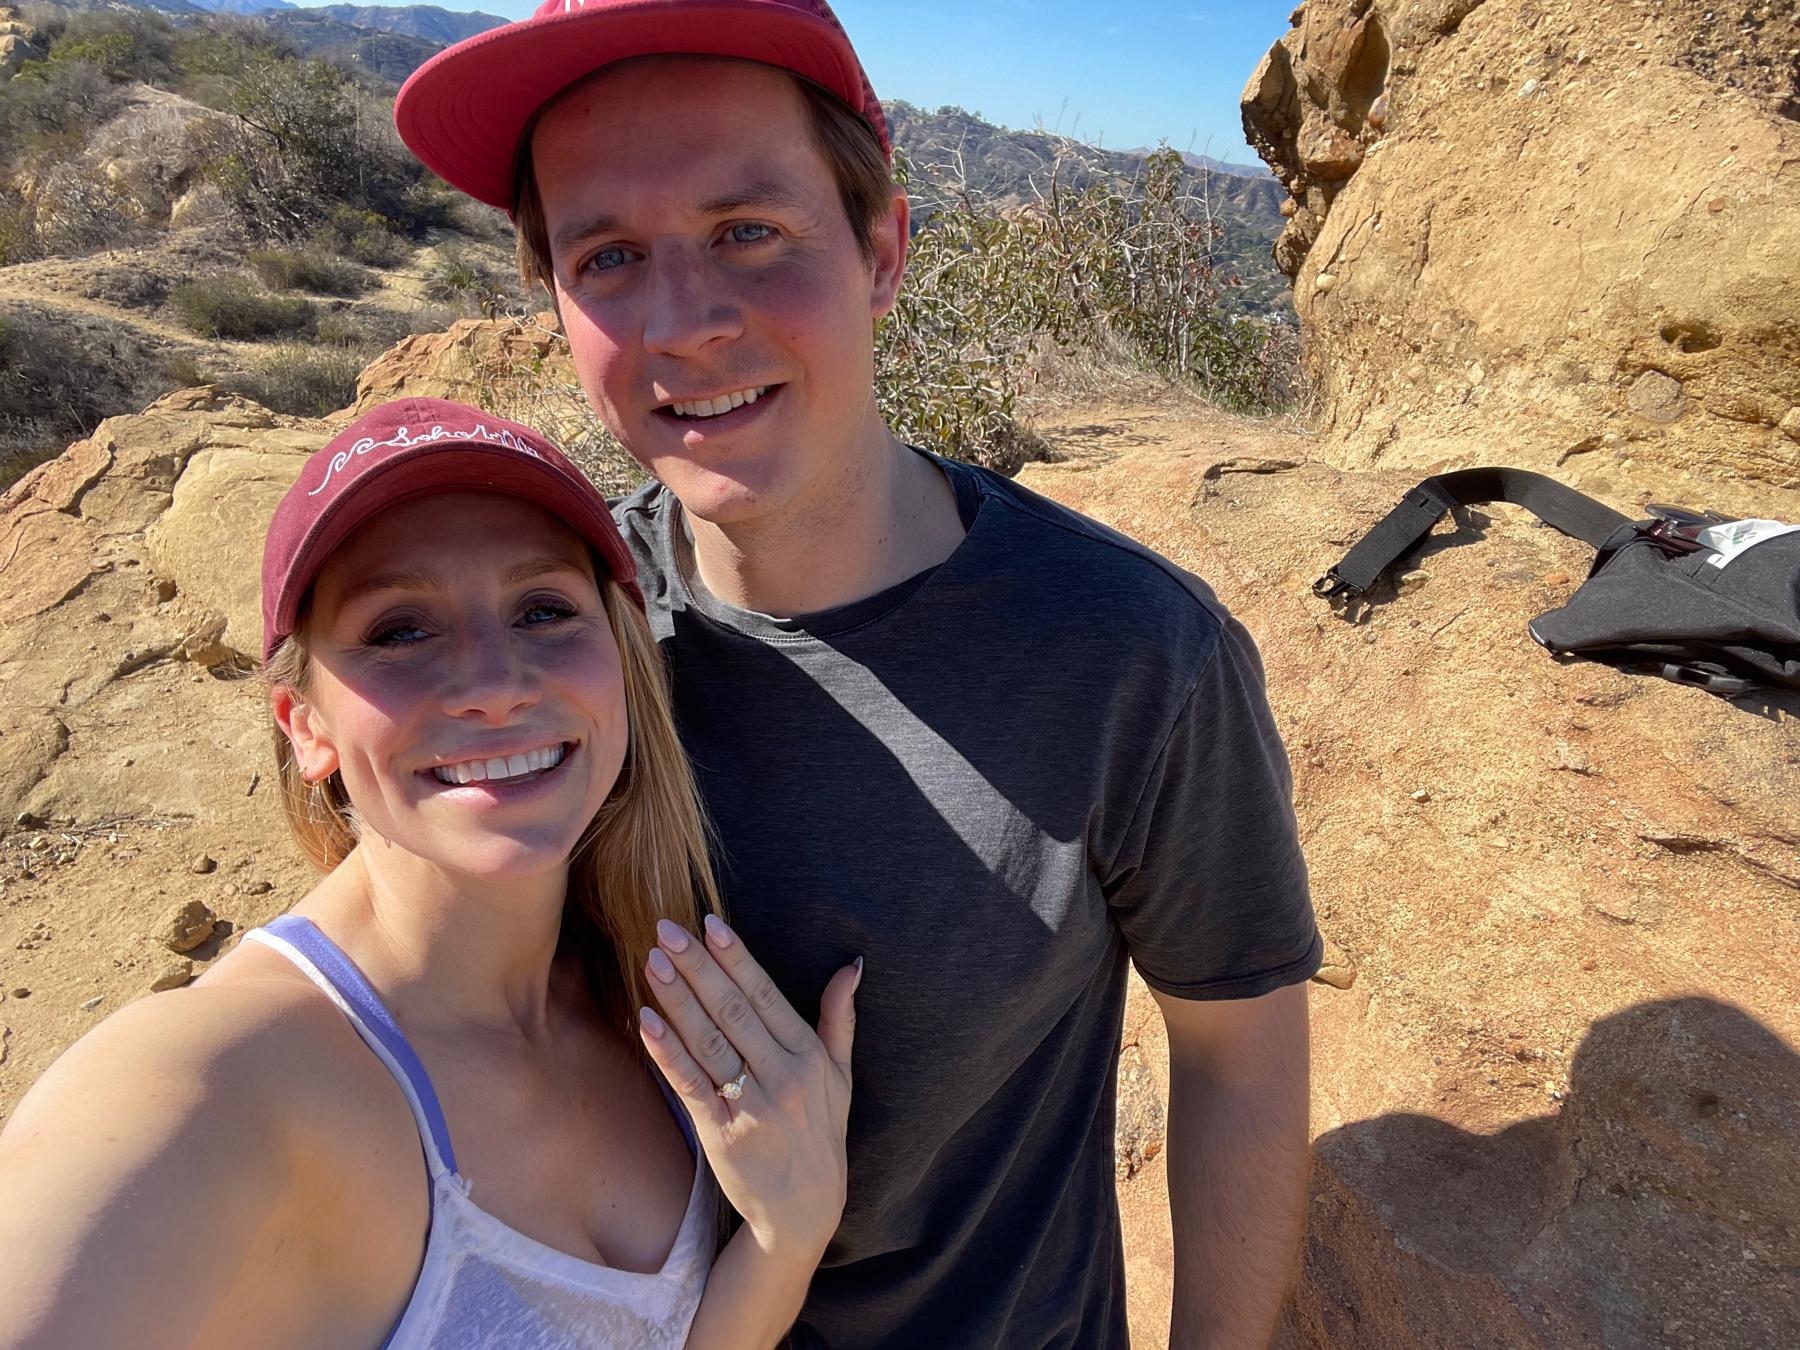 Michael proposed to Lindsay on a hike in Malibu on November 13, 2021.